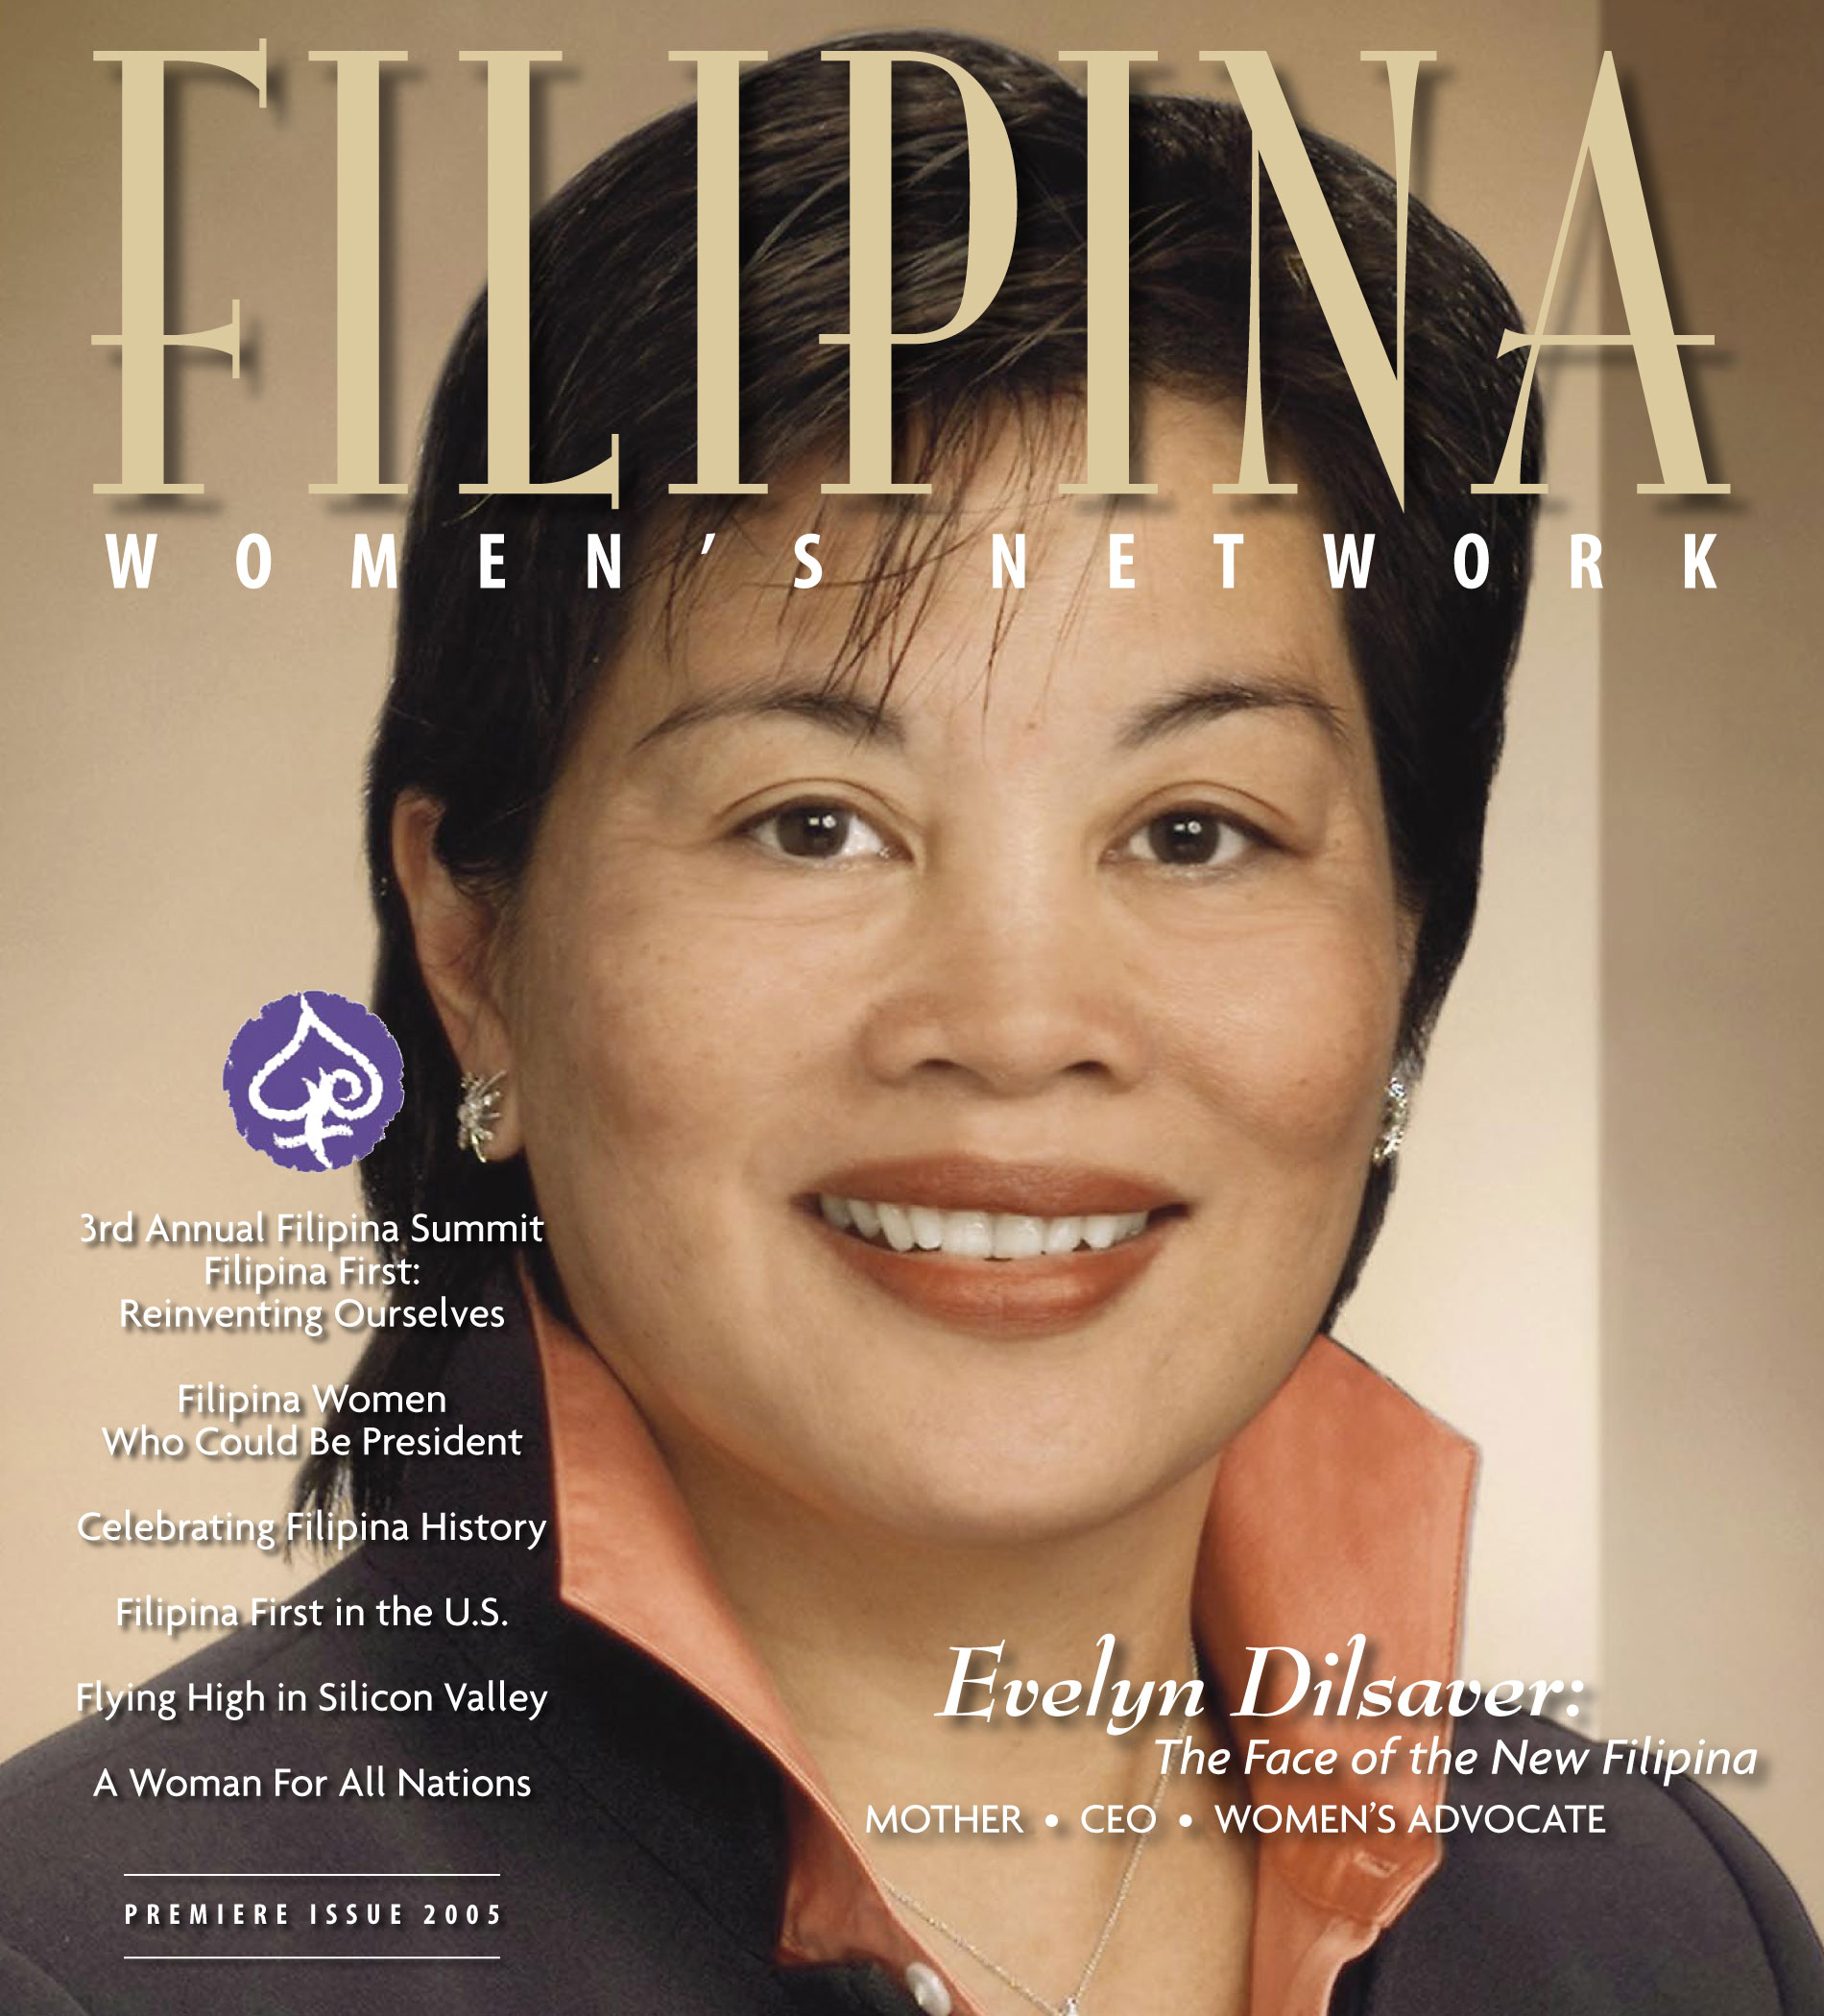 FWN Magazine 2005 - Evelyn Dilsaver